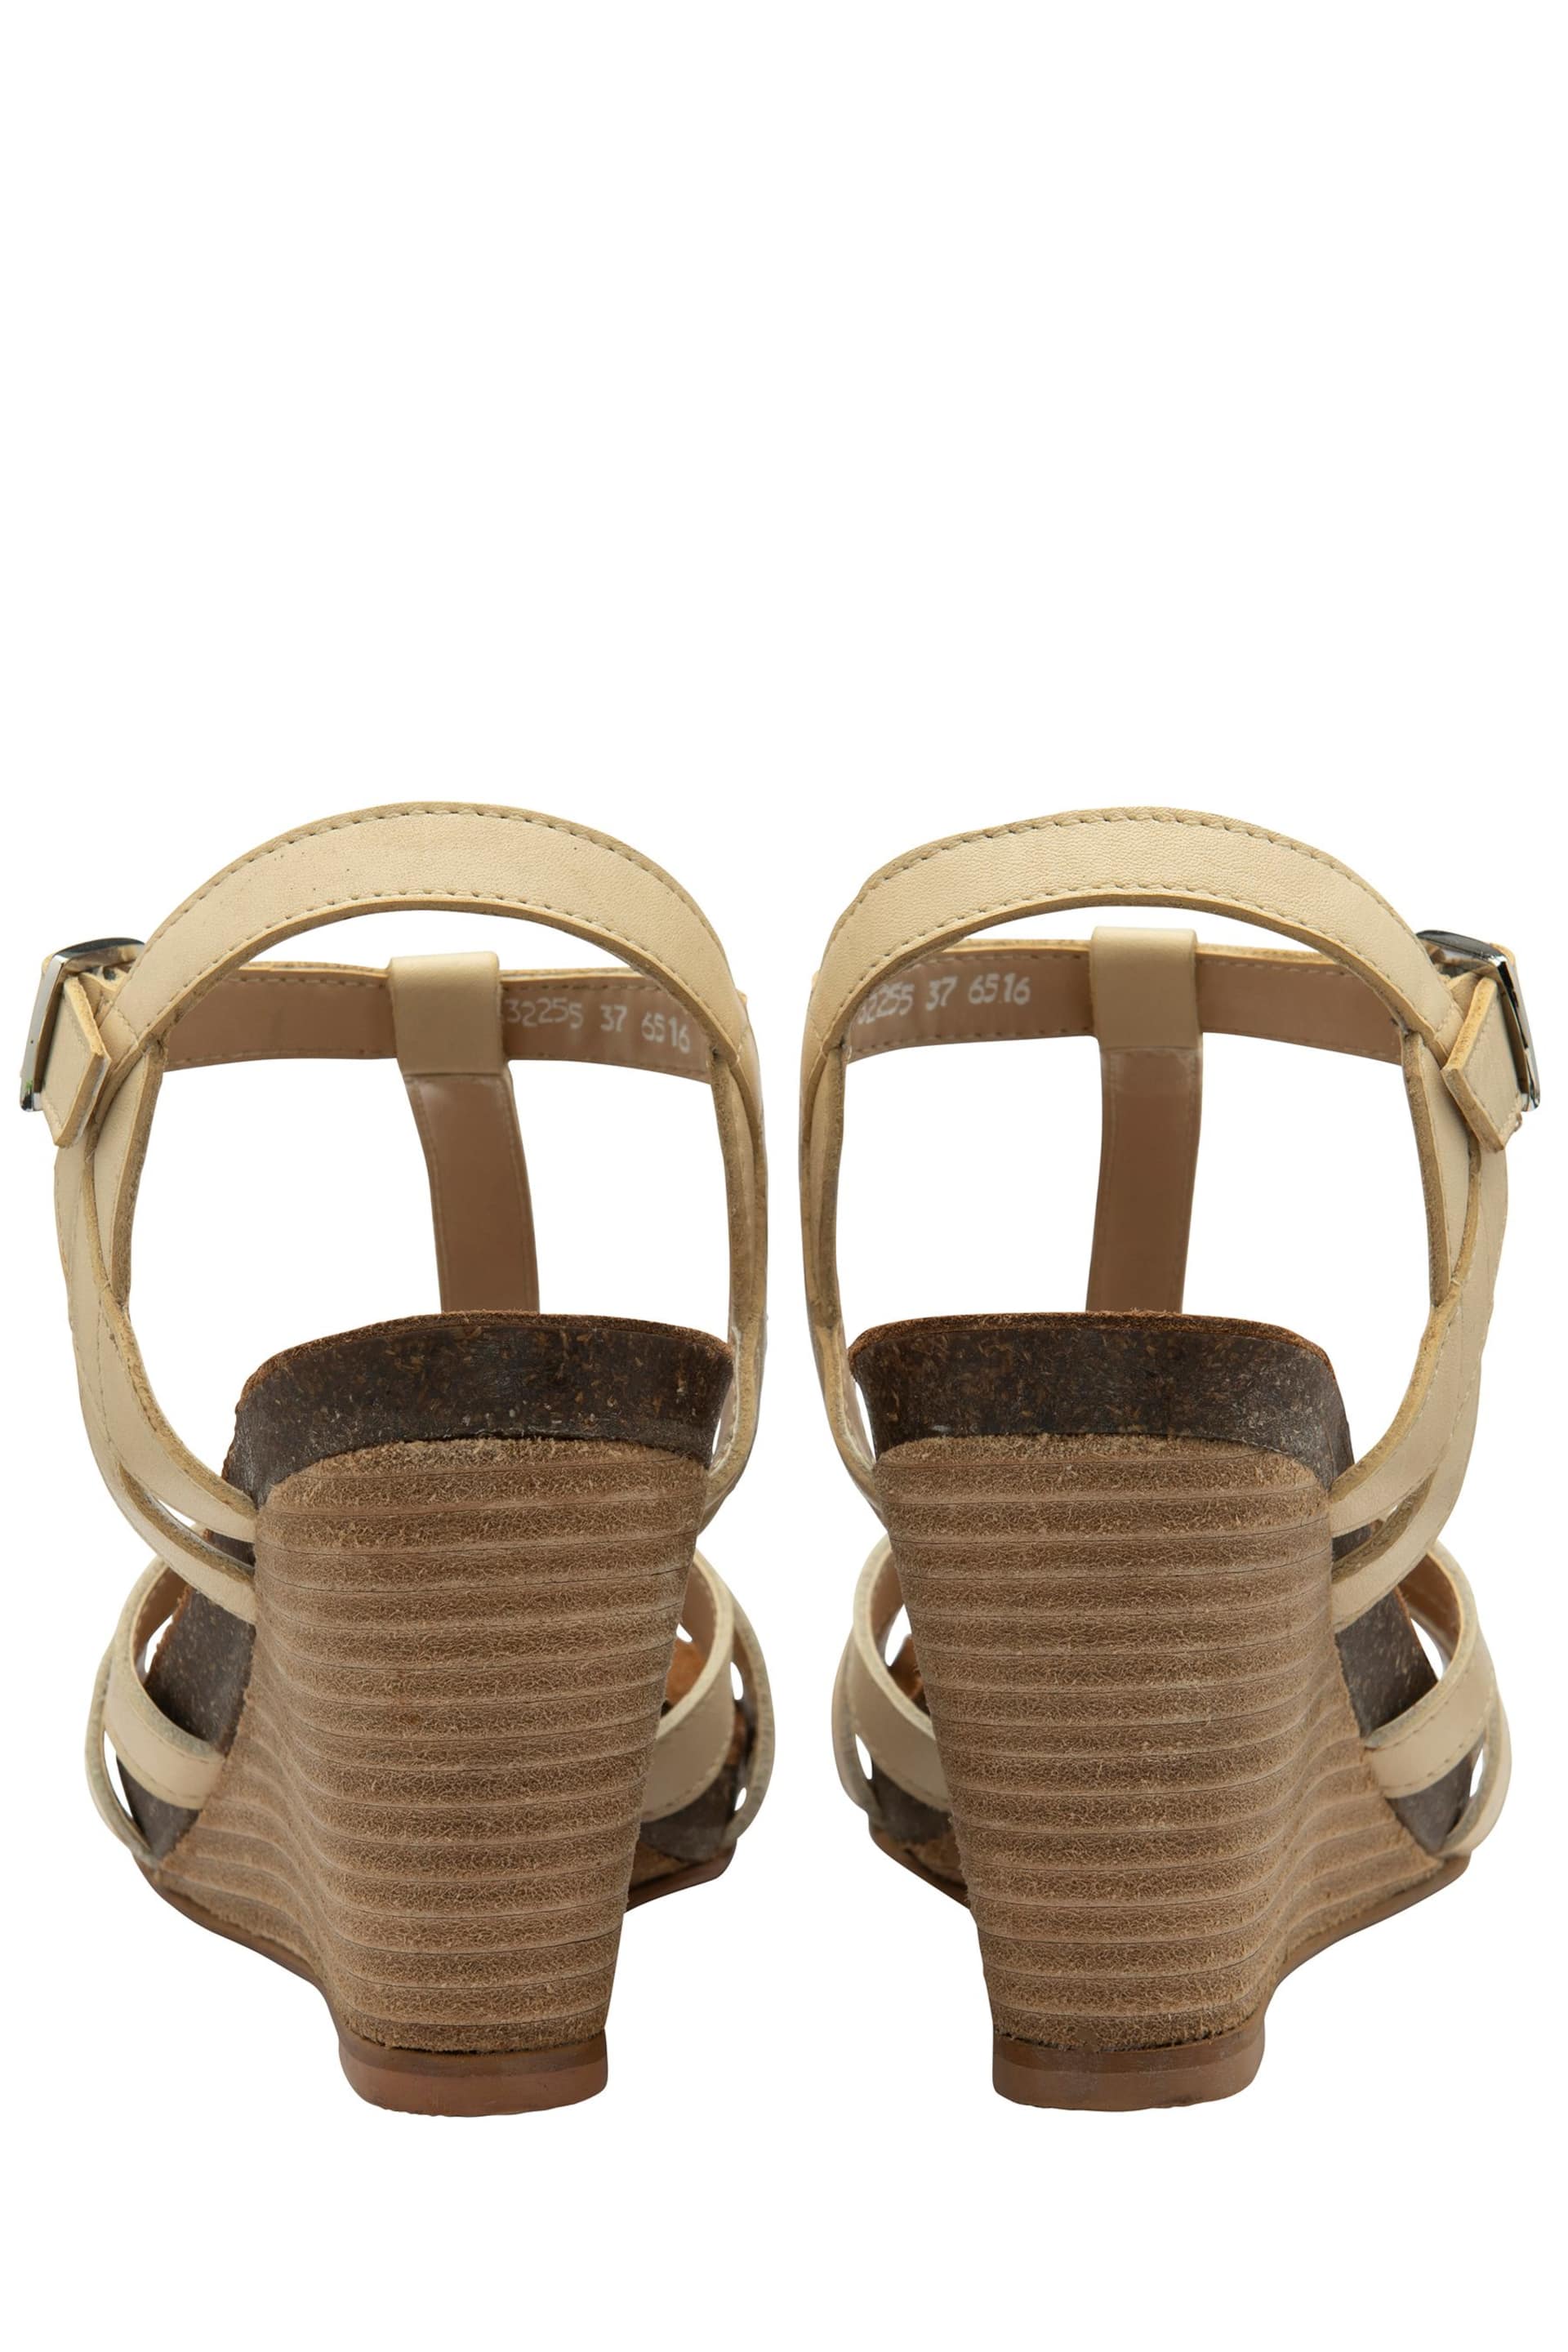 Ravel Cream Leather Wedge Sandals With Strappy Upper - Image 3 of 4